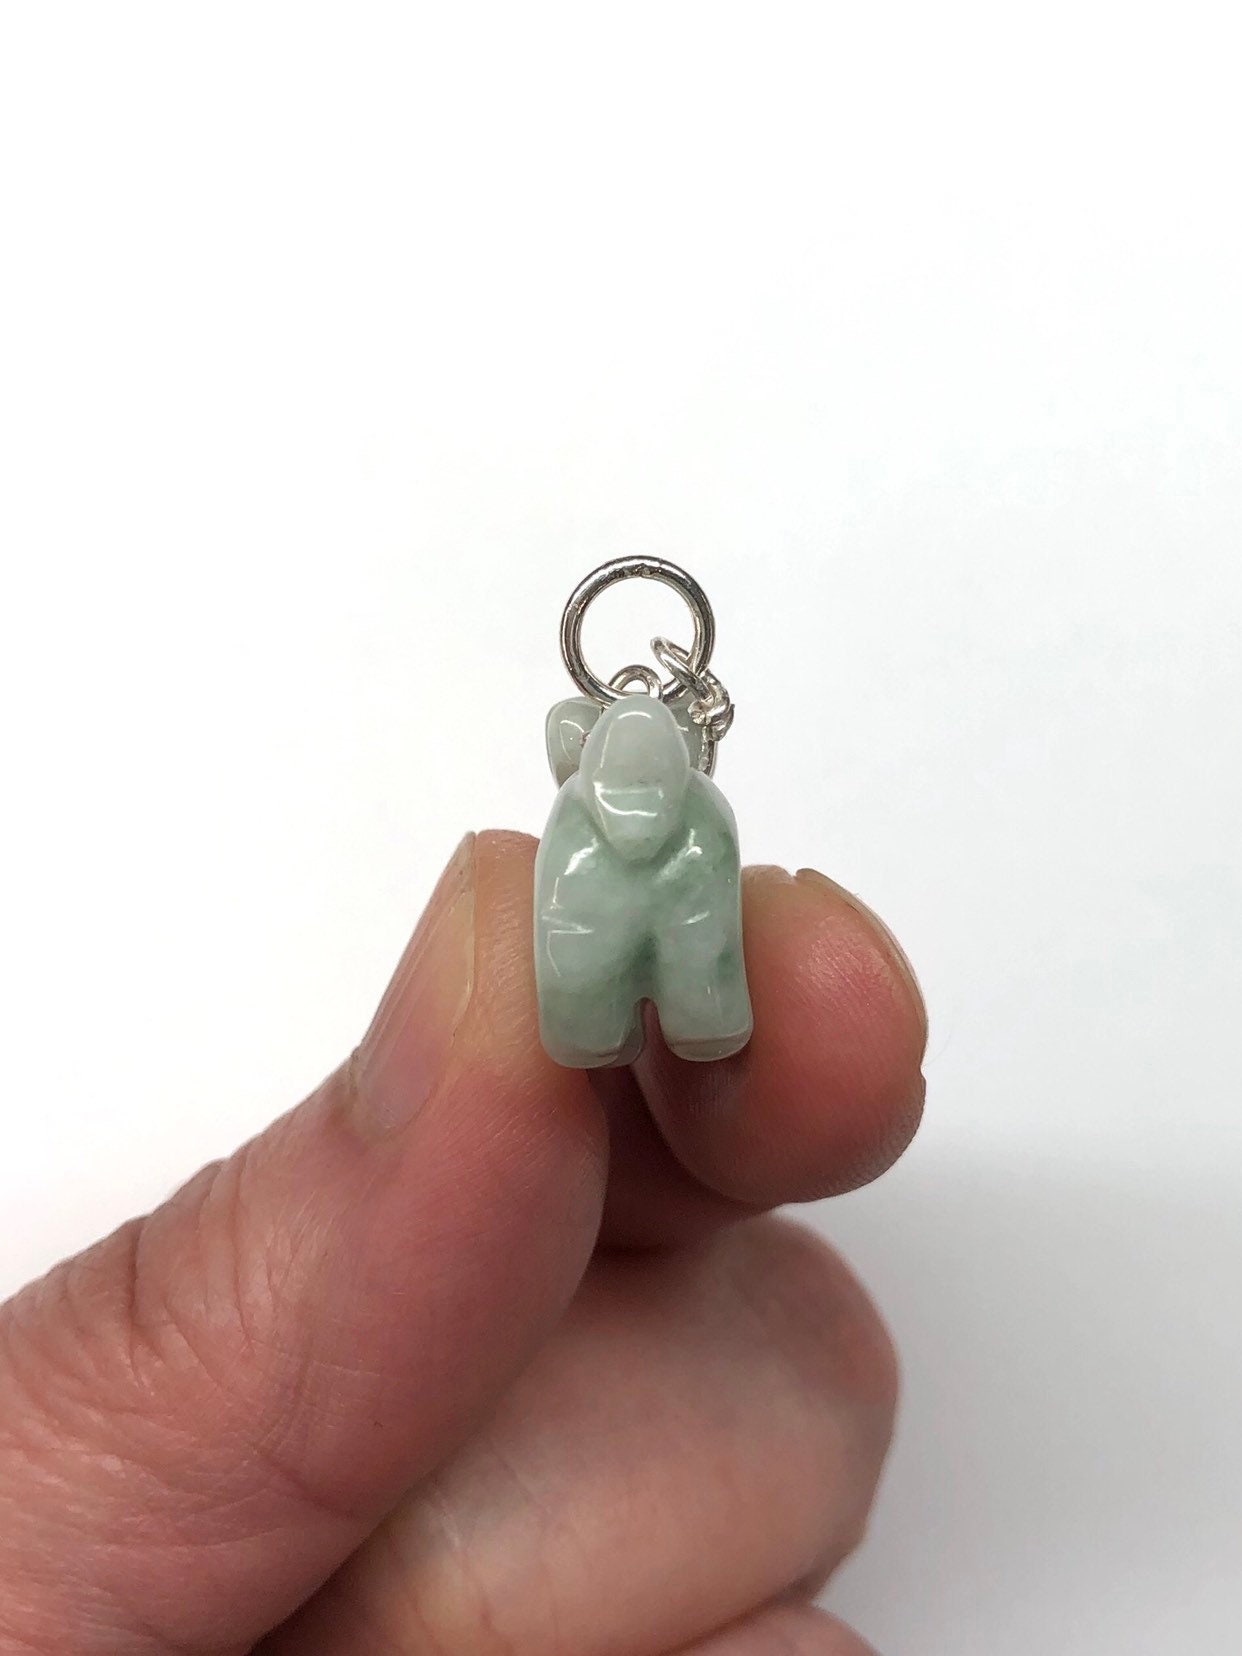 Details about   Green Jade Gem Happy Lucky Kylin QI-LIN Dragon Money Amulet Pendant 